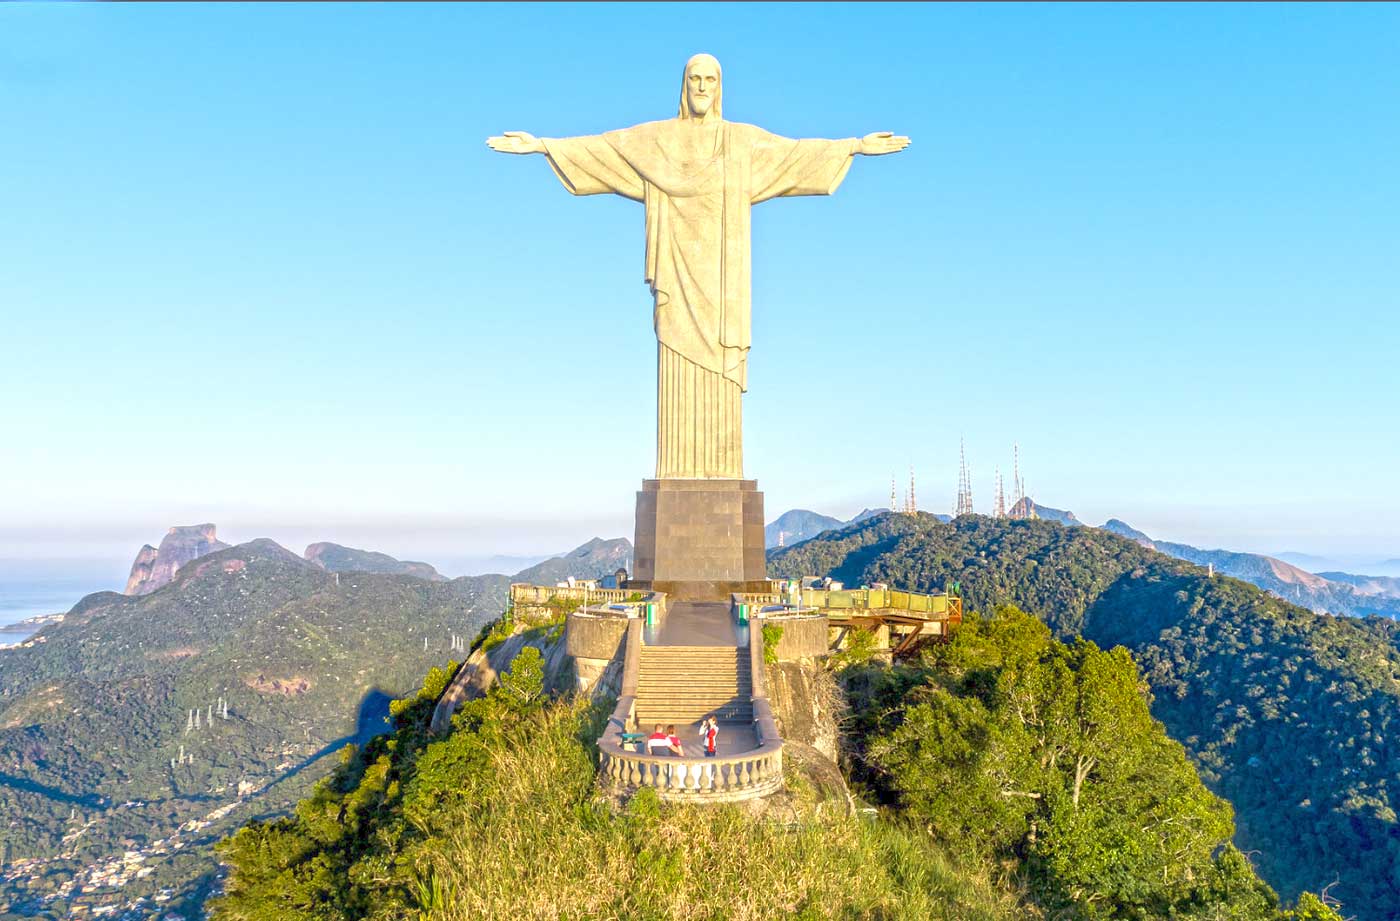 Corcovado - Christ the Redeemer